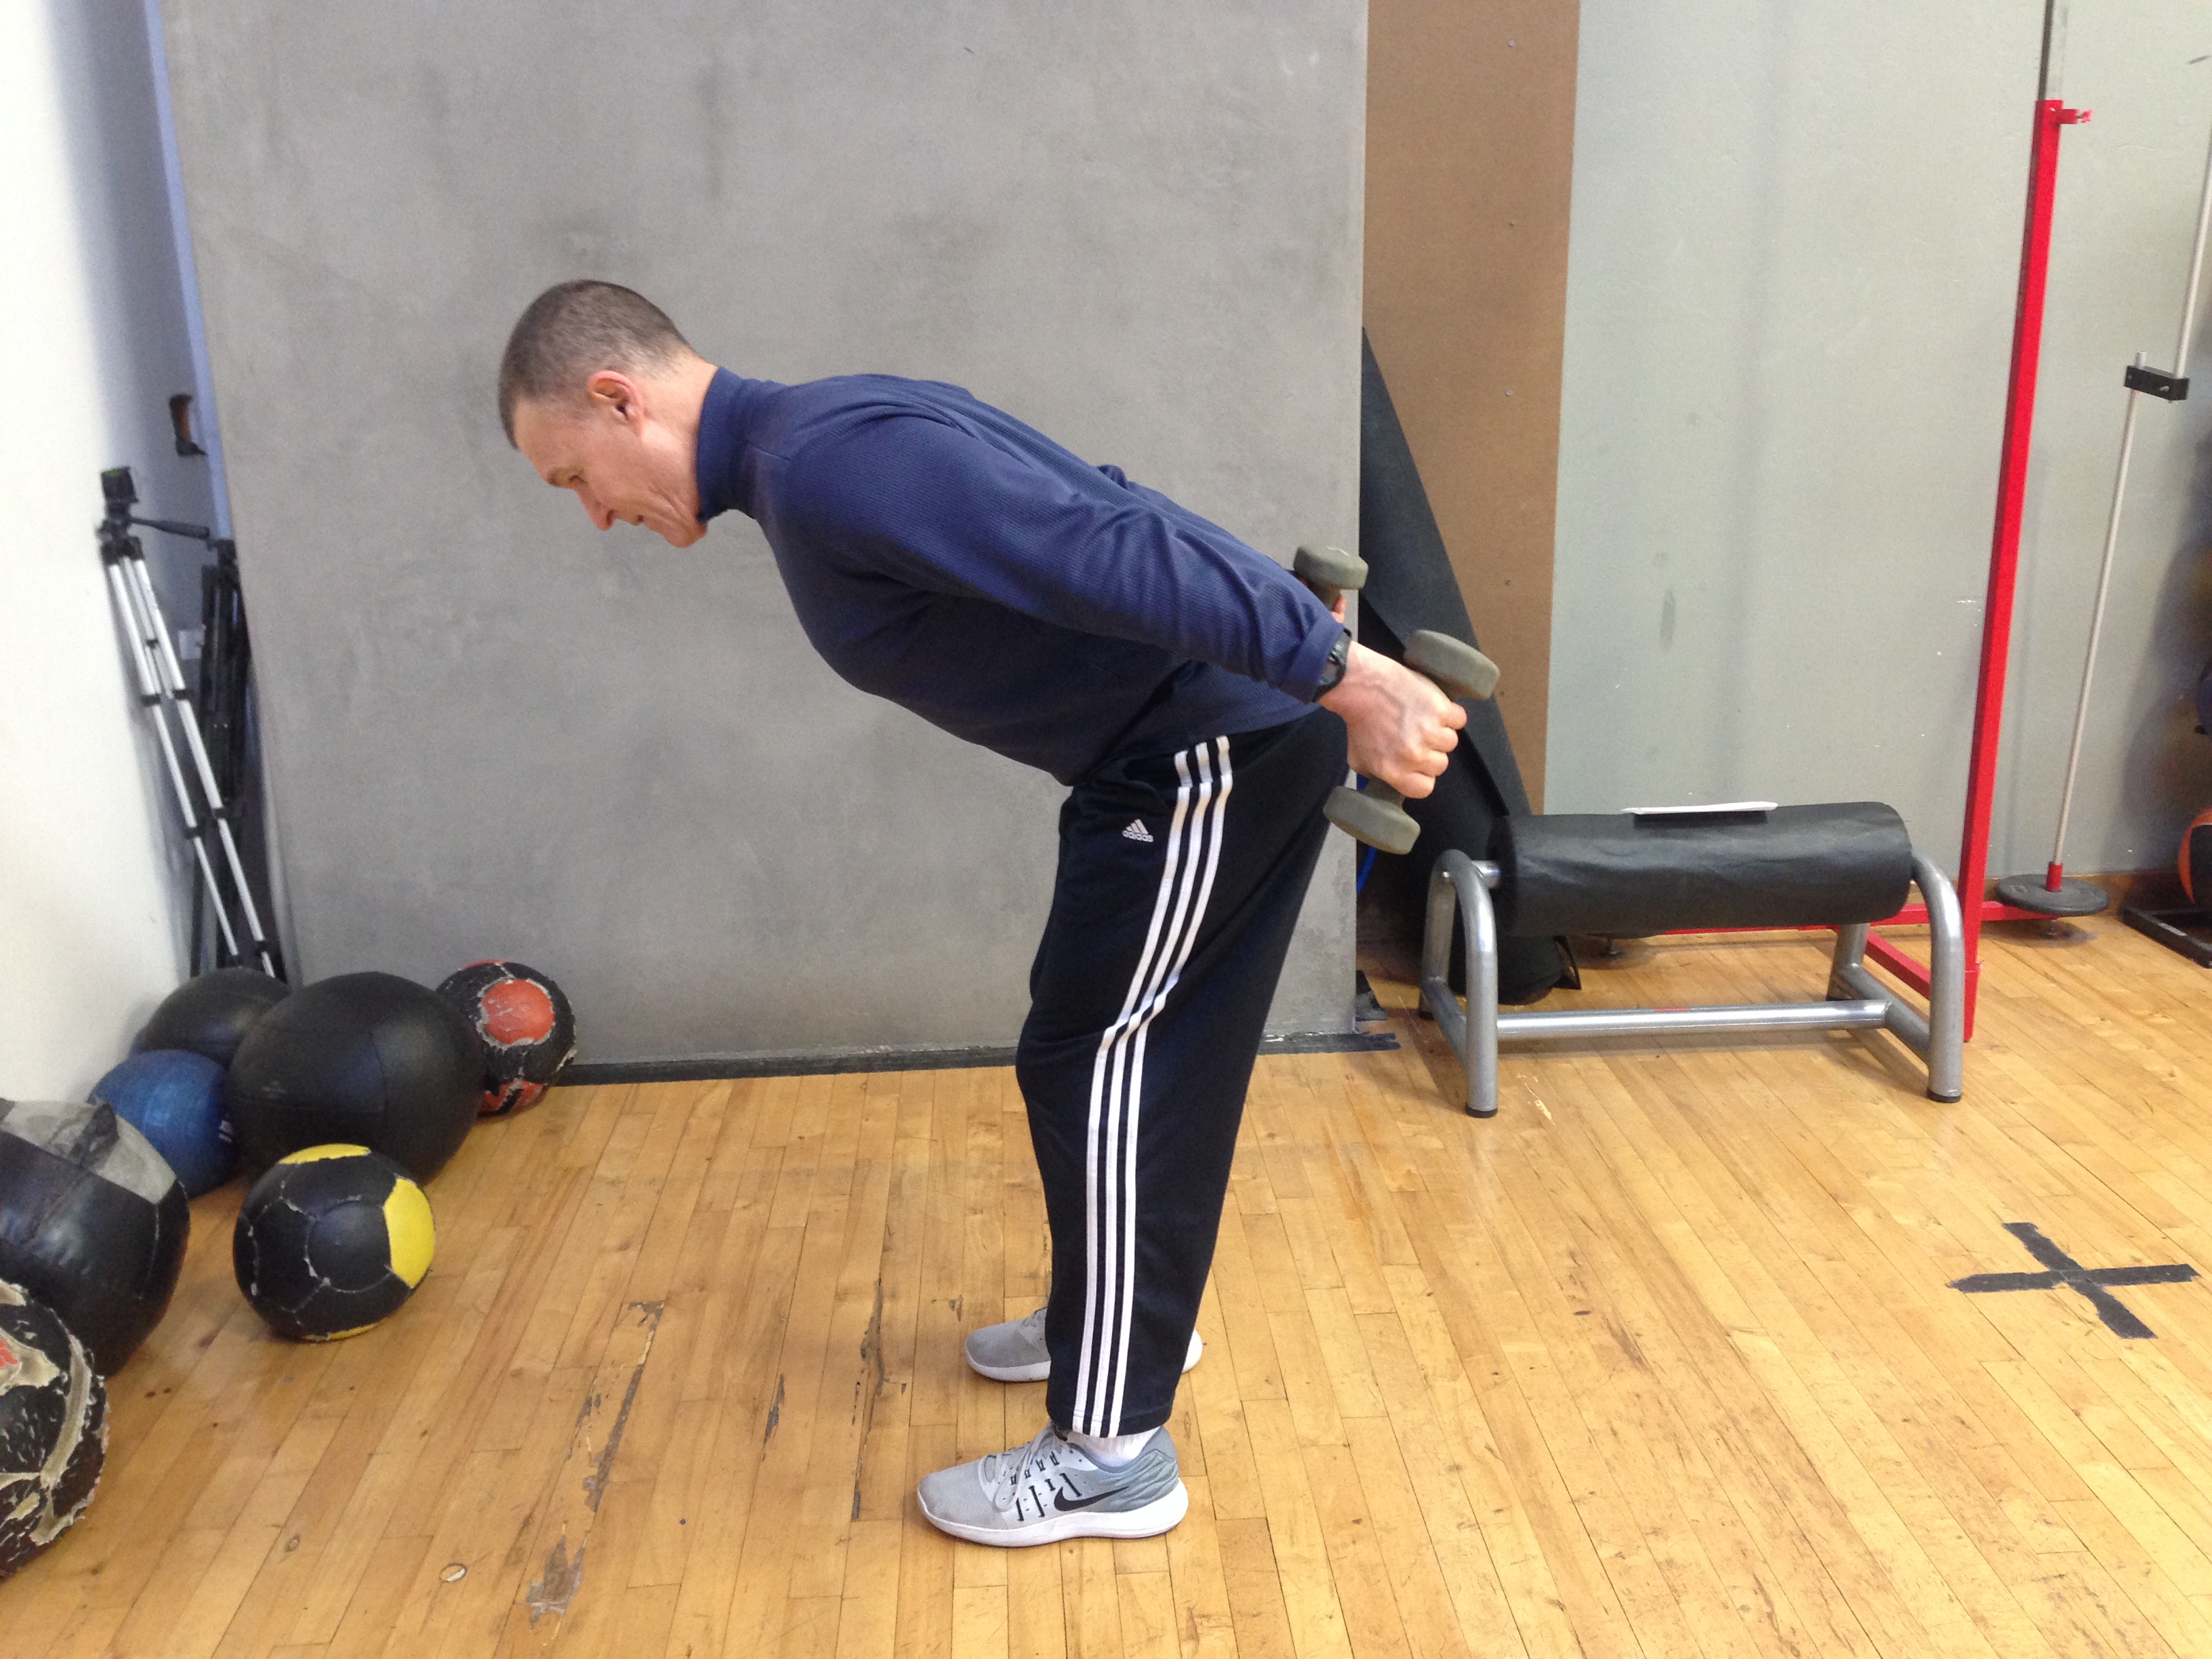 TIME WASTER OF THE MONTH: DUMBBELL TRICEPS KICKBACK